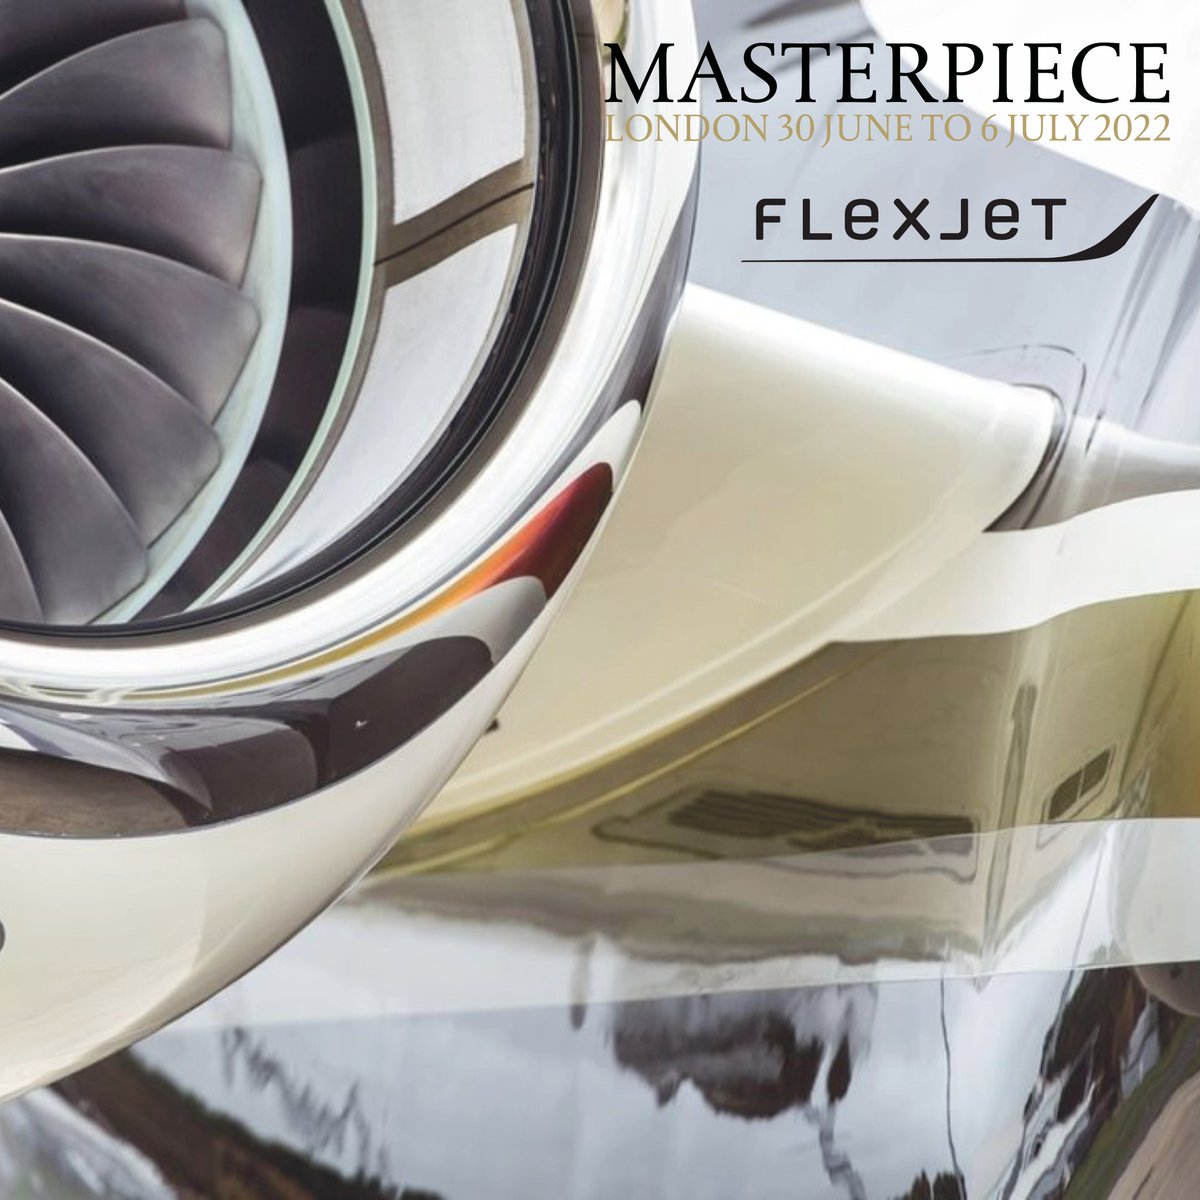 We are honoured to partner with @Flexjet, a world-class private jet provider featuring world-class service, obsessive attention to detail, and the industry’s most modern fleet. #Flexjet's shared ownership programme includes personalised private air travel experiences.